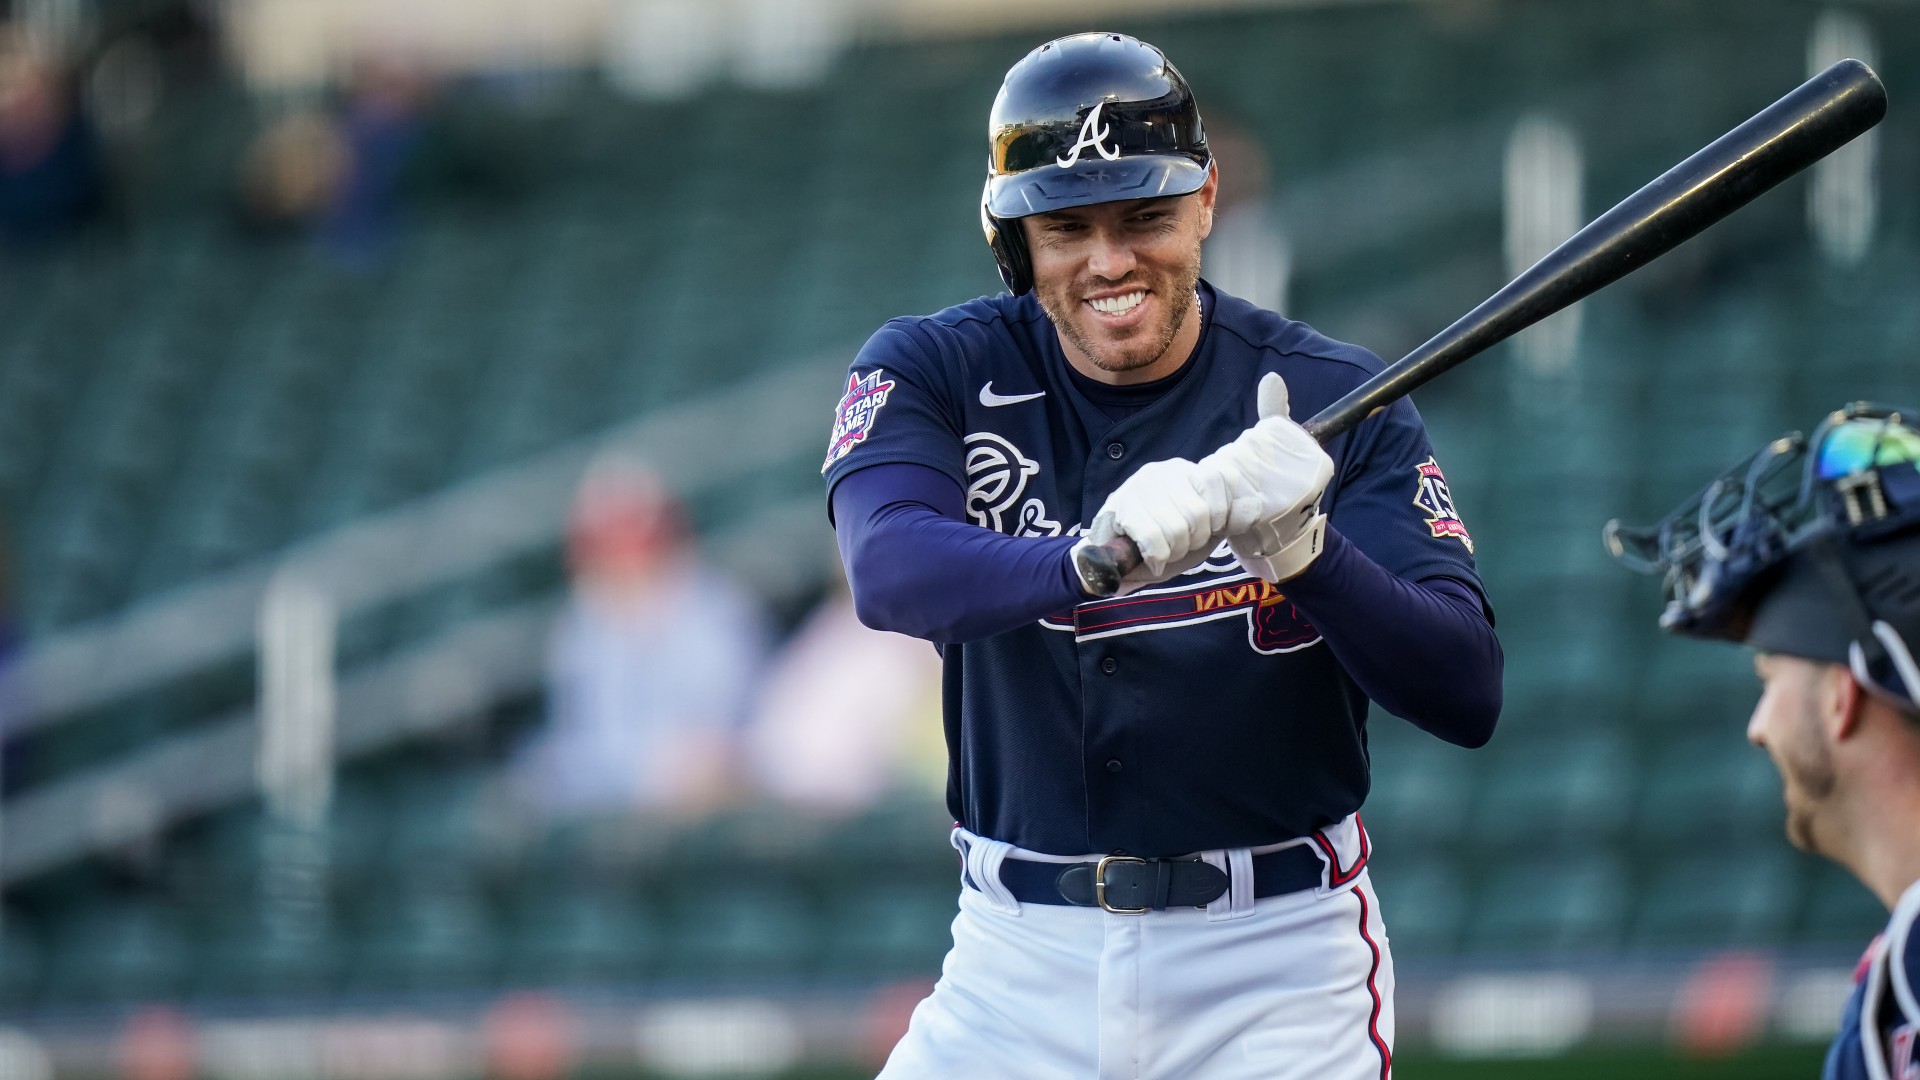 Freddie Freeman S Son Had An Adorable Reaction After Hearing The New Walk Up Song He Picked For His Dad Sporting News